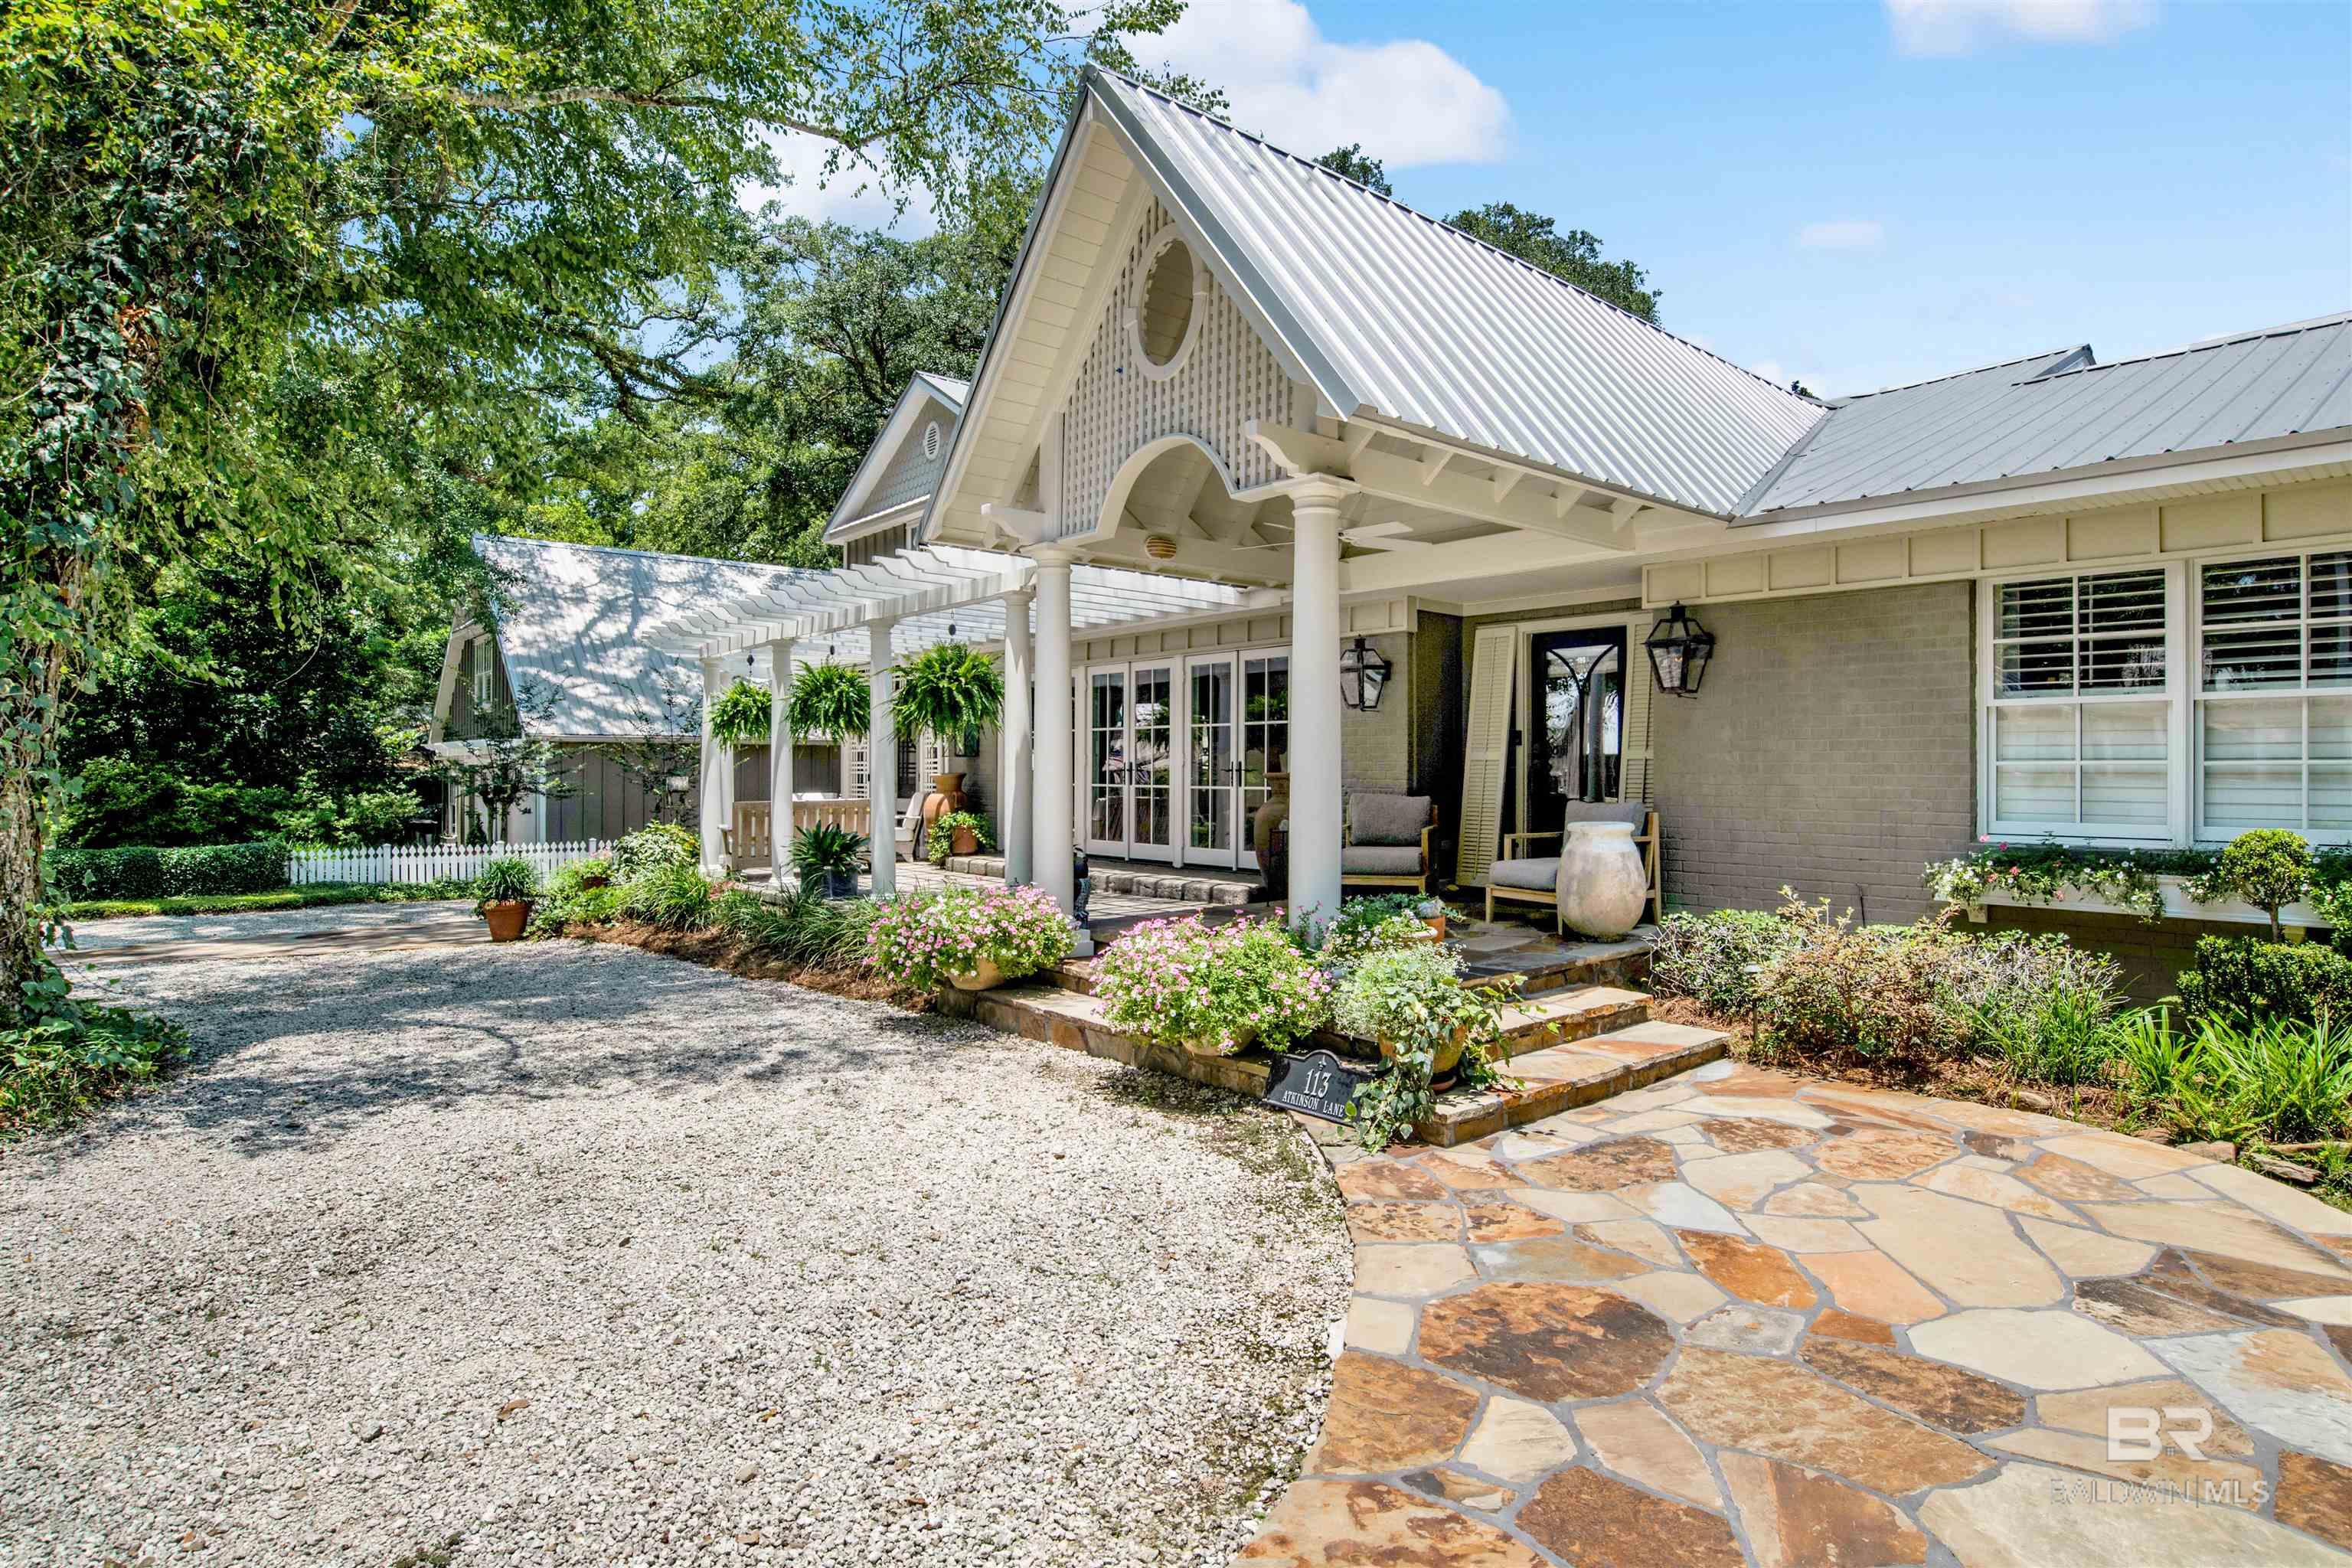 This is an exceptional residence located in The Bluff area of Old Fairhope situated in close proximity to downtown and the bay / Shaded by a canopy of ancient oaks the immaculately maintained grounds with flagstone walkways leading to the herb garden, an arbored front porch with gas light entry and additional access via a screened porch with stone fireplace provides an interesting introduction to the home / Extensive renovations and additions created spacious living areas and numerous amenities / Well appointed kitchen with WOLF appliances including 6 burner gas range + grill, pot filler, large cabinet matched Sub Zero refrigeration, new dual Fisher Paykel drawer dishwashers, 9X5 center island-breakfast bar with icemaker and farm sink / Walk in pantry, fully equipped Butler’s pantry with wine refrigeration-icemaker-dishwasher opens to formal dining room via French doors / Two Main Suites on first level, one with micro jet tub and separate shower, one with large stream shower, both with his and hers closets / Additional room on 2nd level possible study, etc., is currently used as a bedroom without closet space / Additional pantry-office nook adjacent to utility room with folding counter, storage and built in ironing board / Guest suite with full bath above garage identified as 4th bedroom / Spacious double carport with 19X9 heated and cooled workshop / Excellent outdoor entertainment area with heated and cooled ½ bathroom, 21X16 patio covered by a 16x16 UHLMANN commercial strength retractable umbrella, large fireplace and 15X9 cook house with SS commercial sinks, individual hot water heater, Black Stone grill and refrigerator / ADDITONAL FEATURES: 20 KW Honeywell generator system powers the entire home / 2 Rannai tankless hot water systems / Extensive sound distribution / Plantation shutters / NEST Thermostats / RING Doorbell / CAT 5 wiring system / Extensive landscape lighting / Yard irrigation system. / Abundant attic storage.